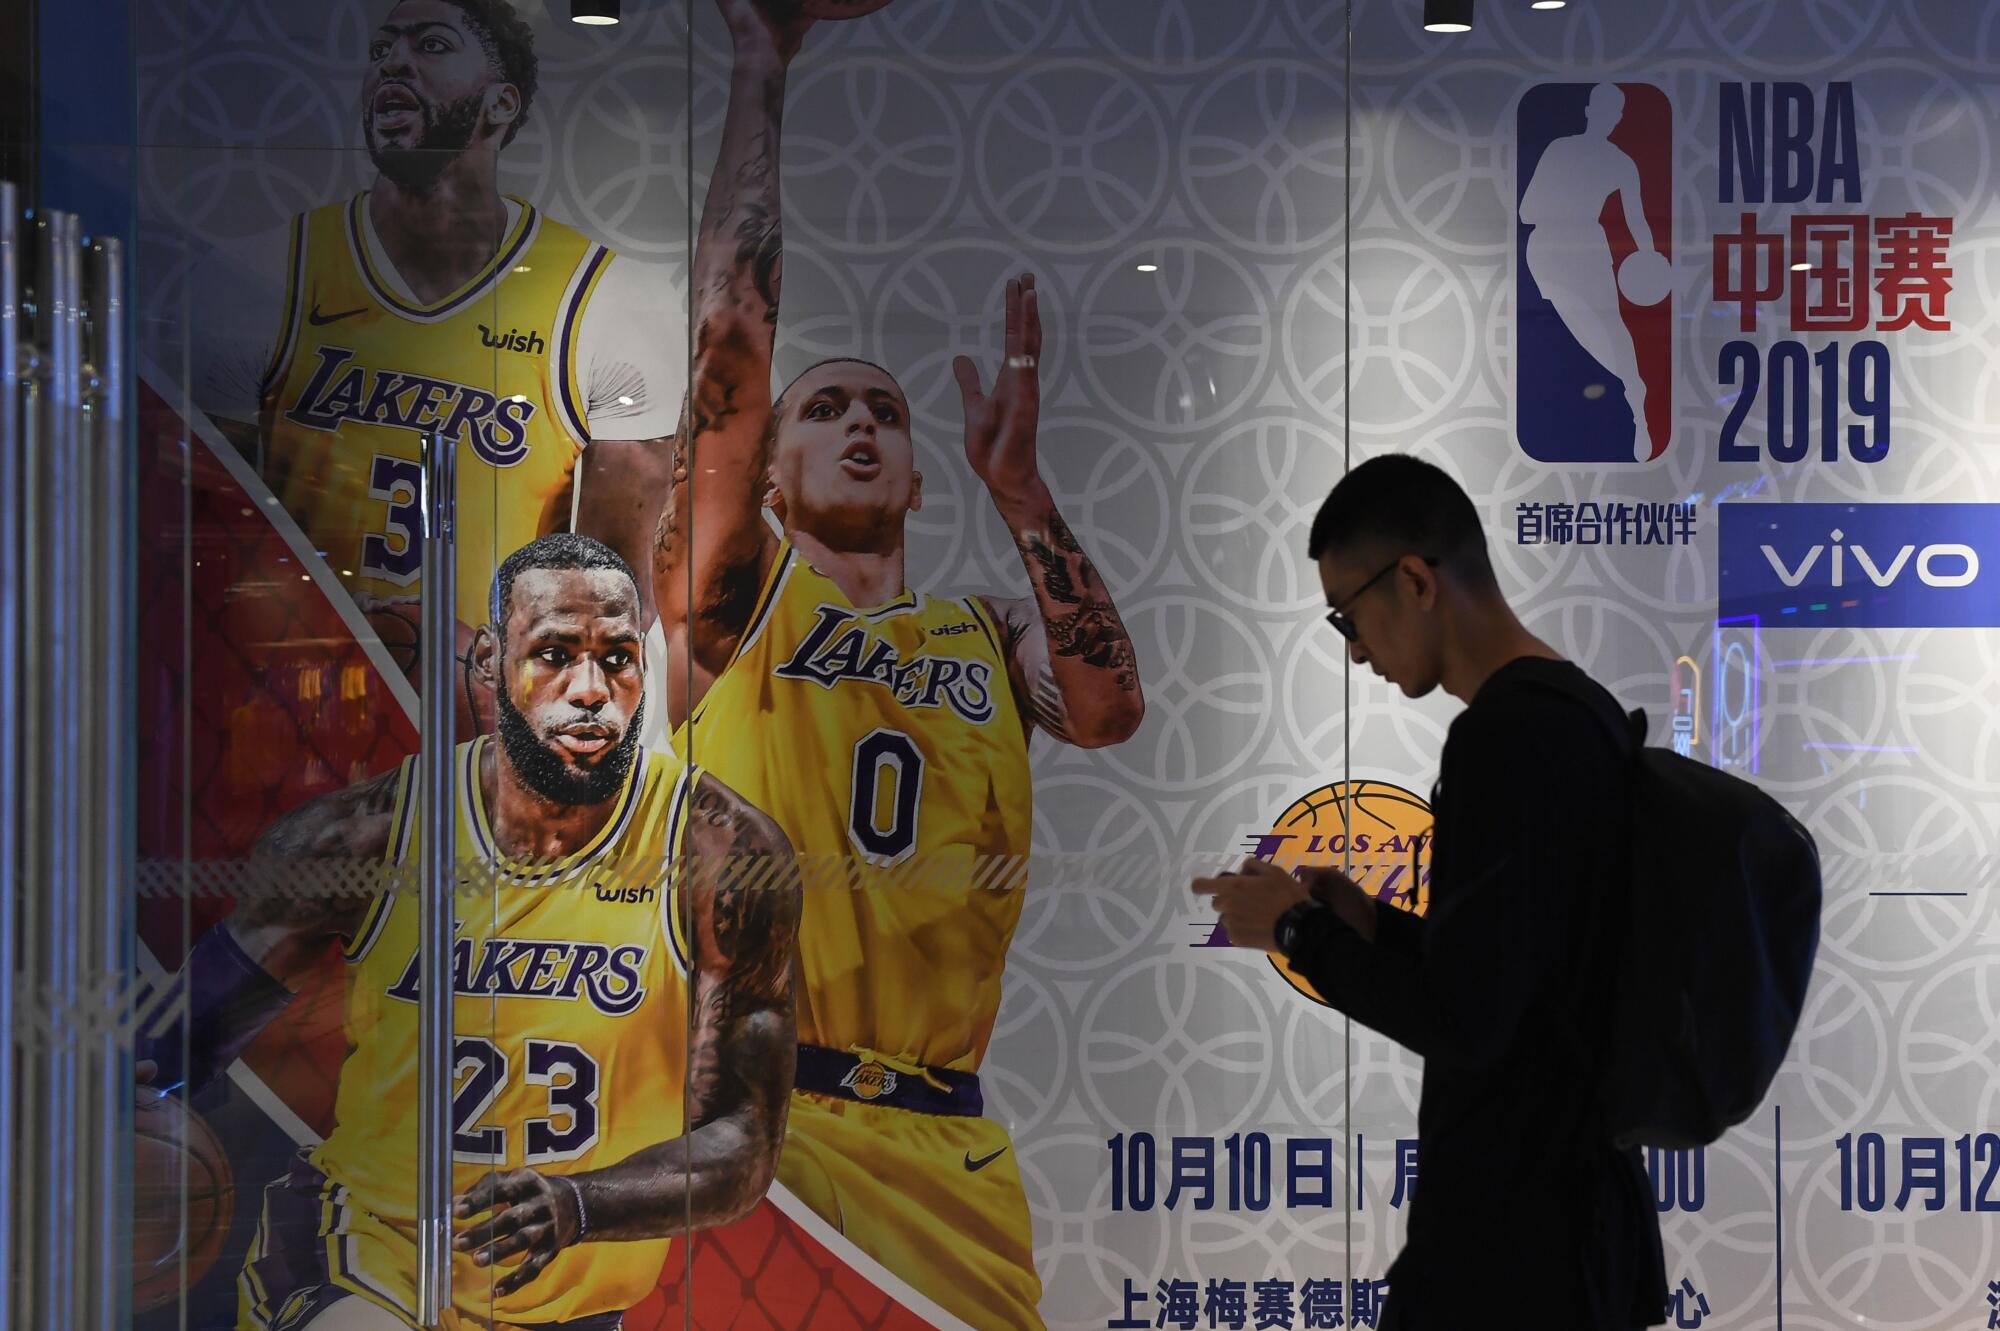 Lakers and Brooklyn Nets in China